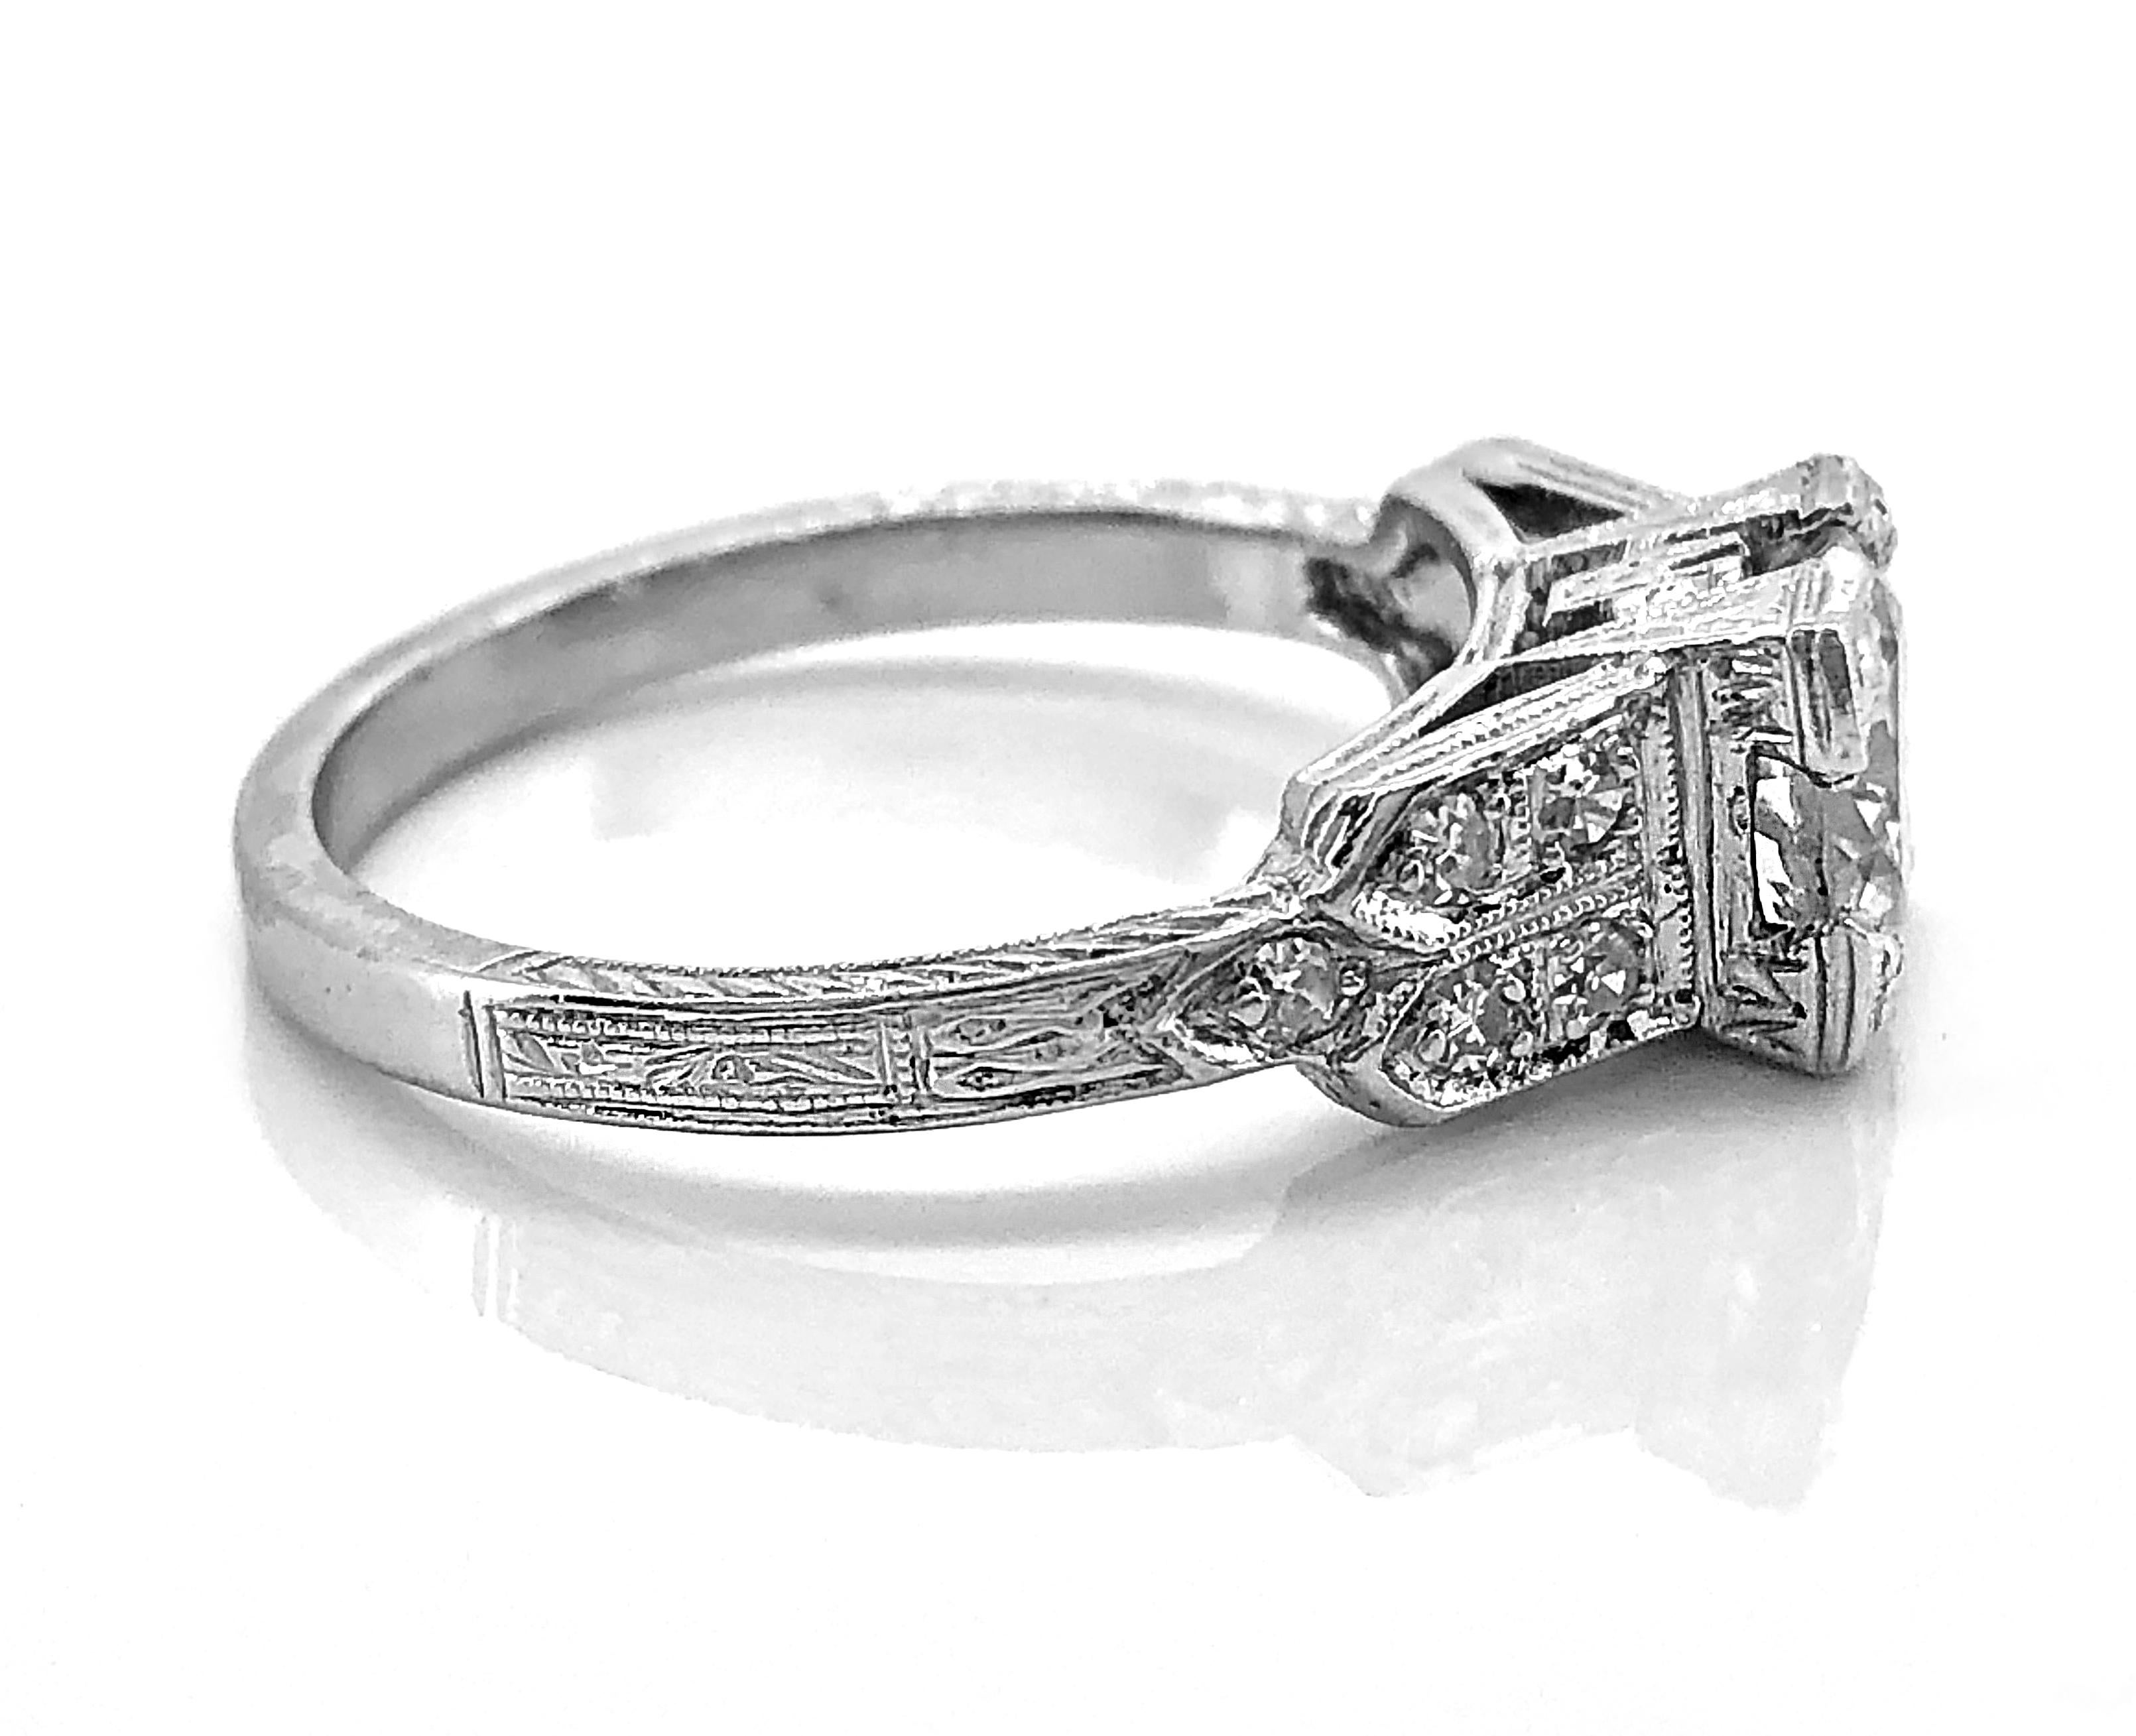 An extraordinary Art Deco diamond Antique engagement ring that features a Transitional cut diamond weighing .98ct. Apx. with SI1 clarity and G color. The accenting single cut diamonds weigh .20ct. Apx. T.W. with VS-SI clarity and G-H color and